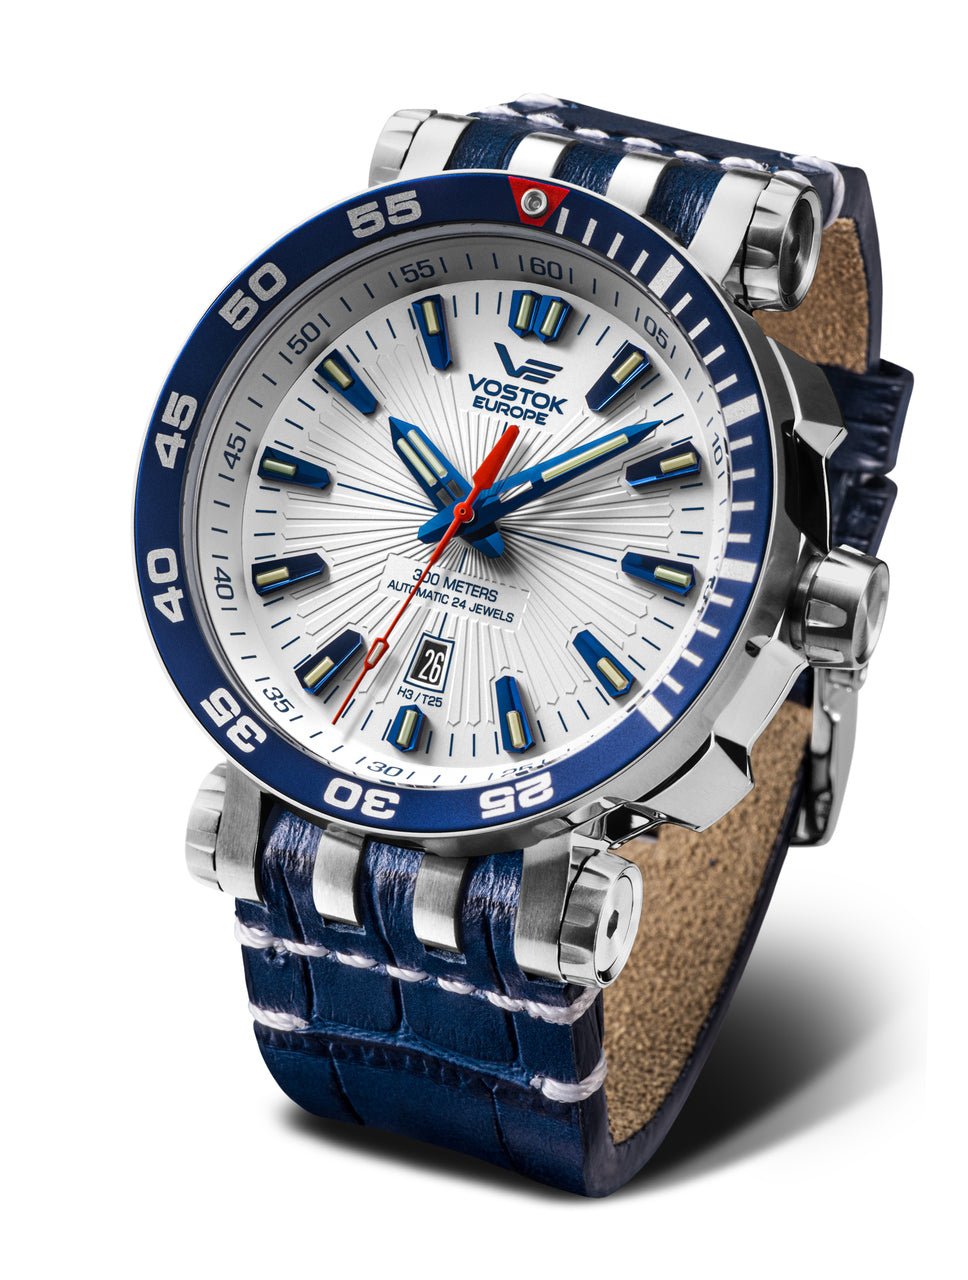 Vostok-Europe Energia 2 Automatic Watch - NH35-575A650 - Maple City Timepieces